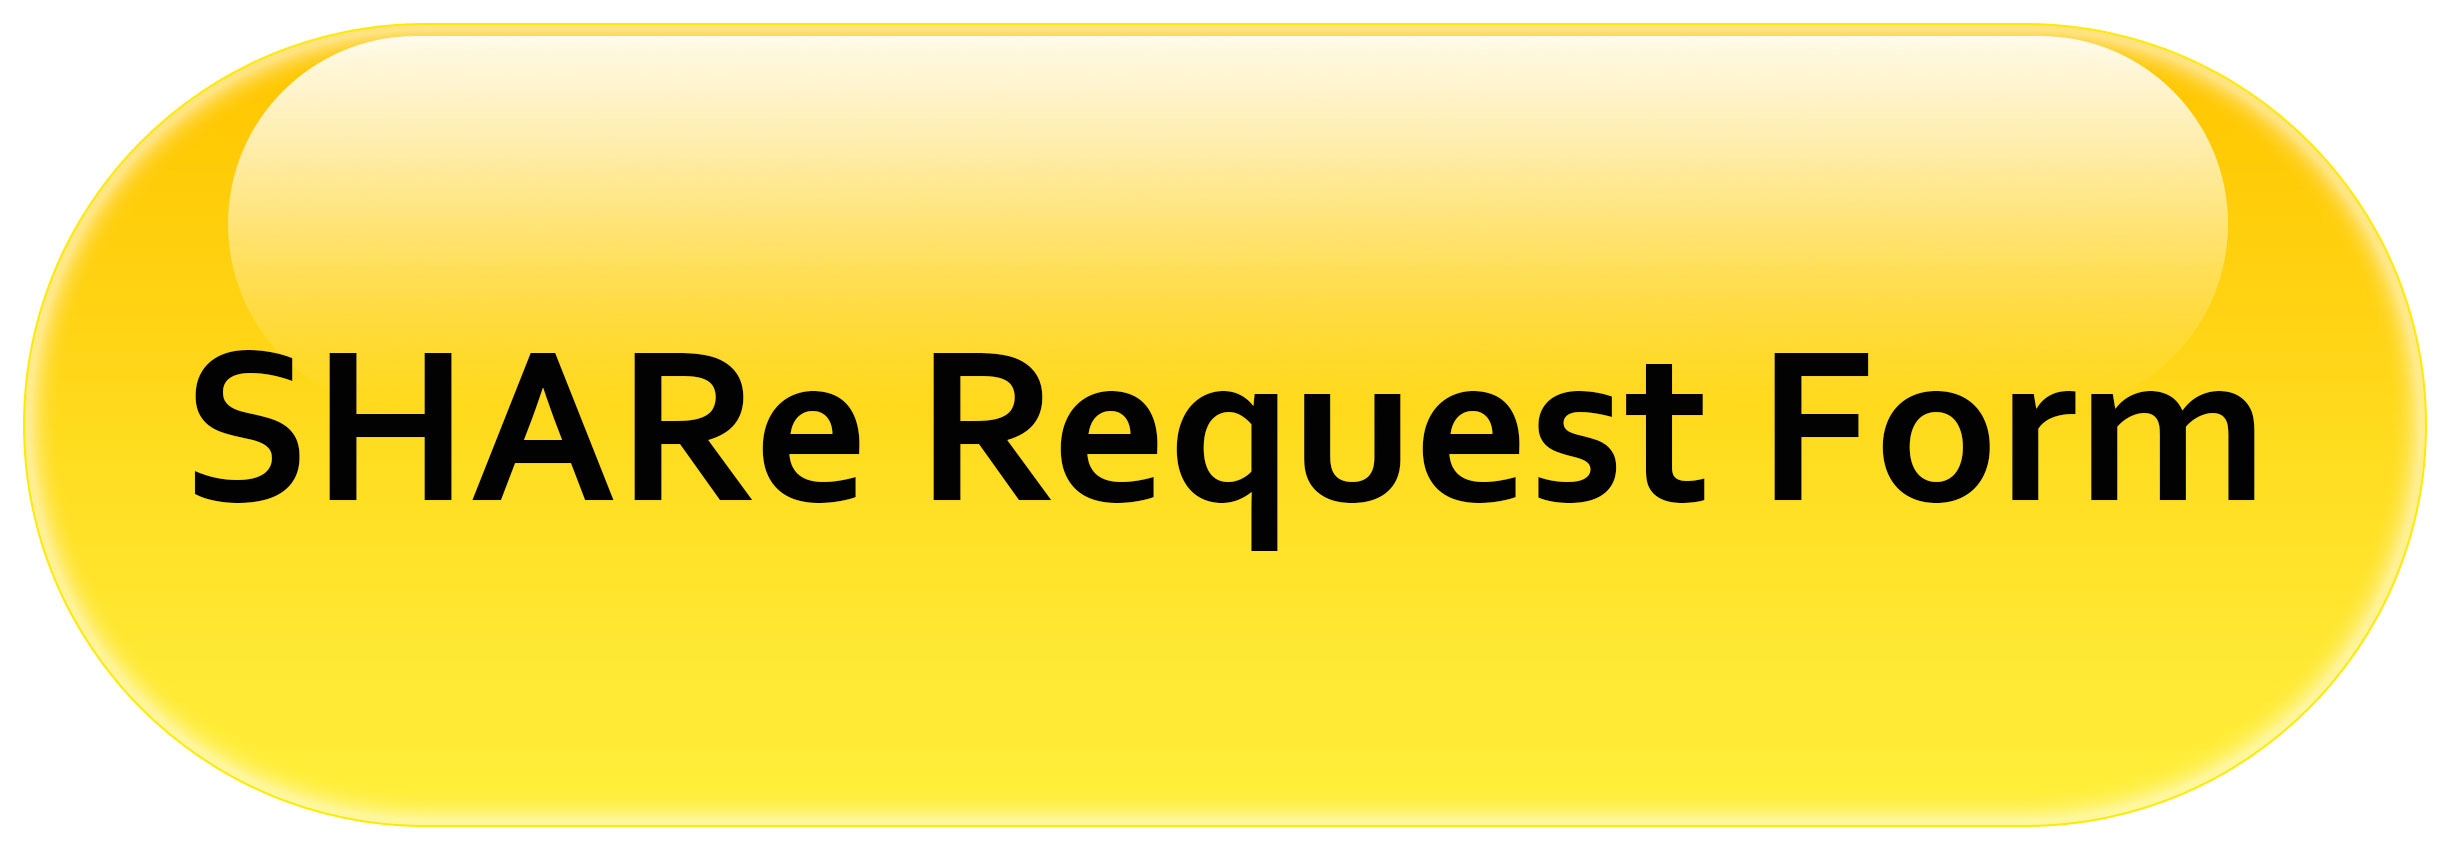 SHARe Request Form button